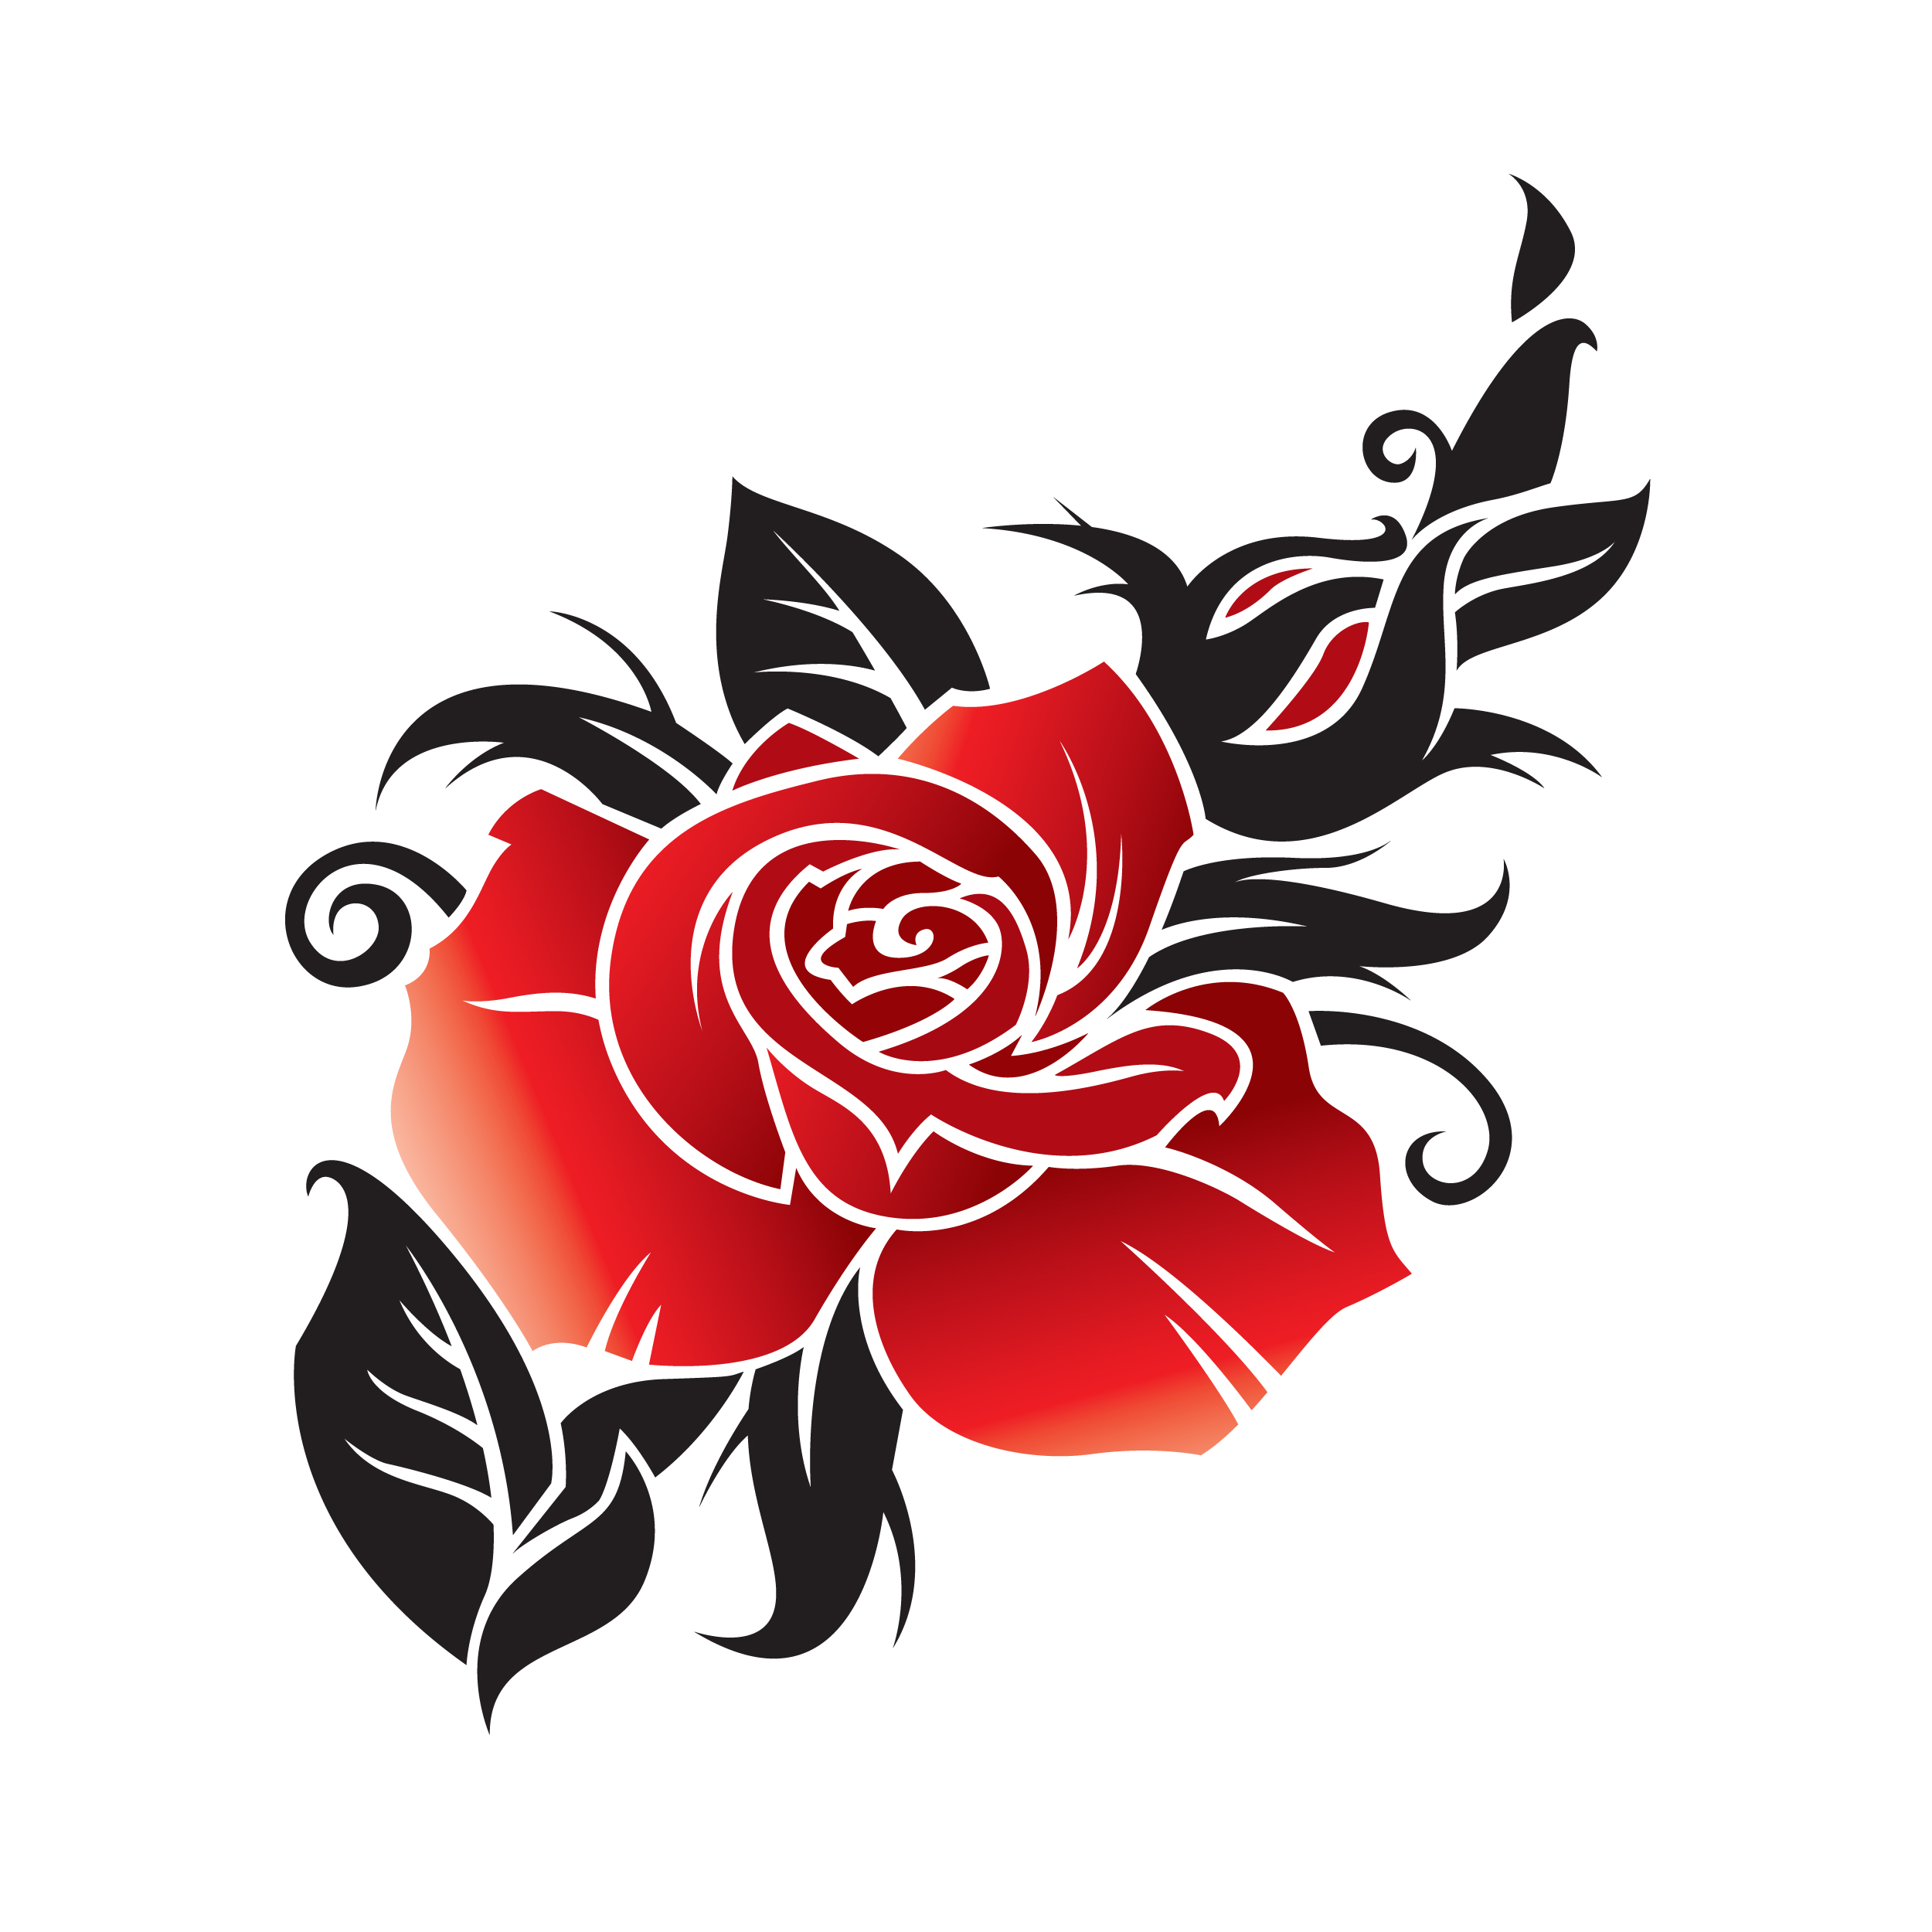 16800 Rose Tattoo Stock Photos Pictures  RoyaltyFree Images  iStock  Rose  tattoo drawing Rose tattoo outline Vector rose tattoo